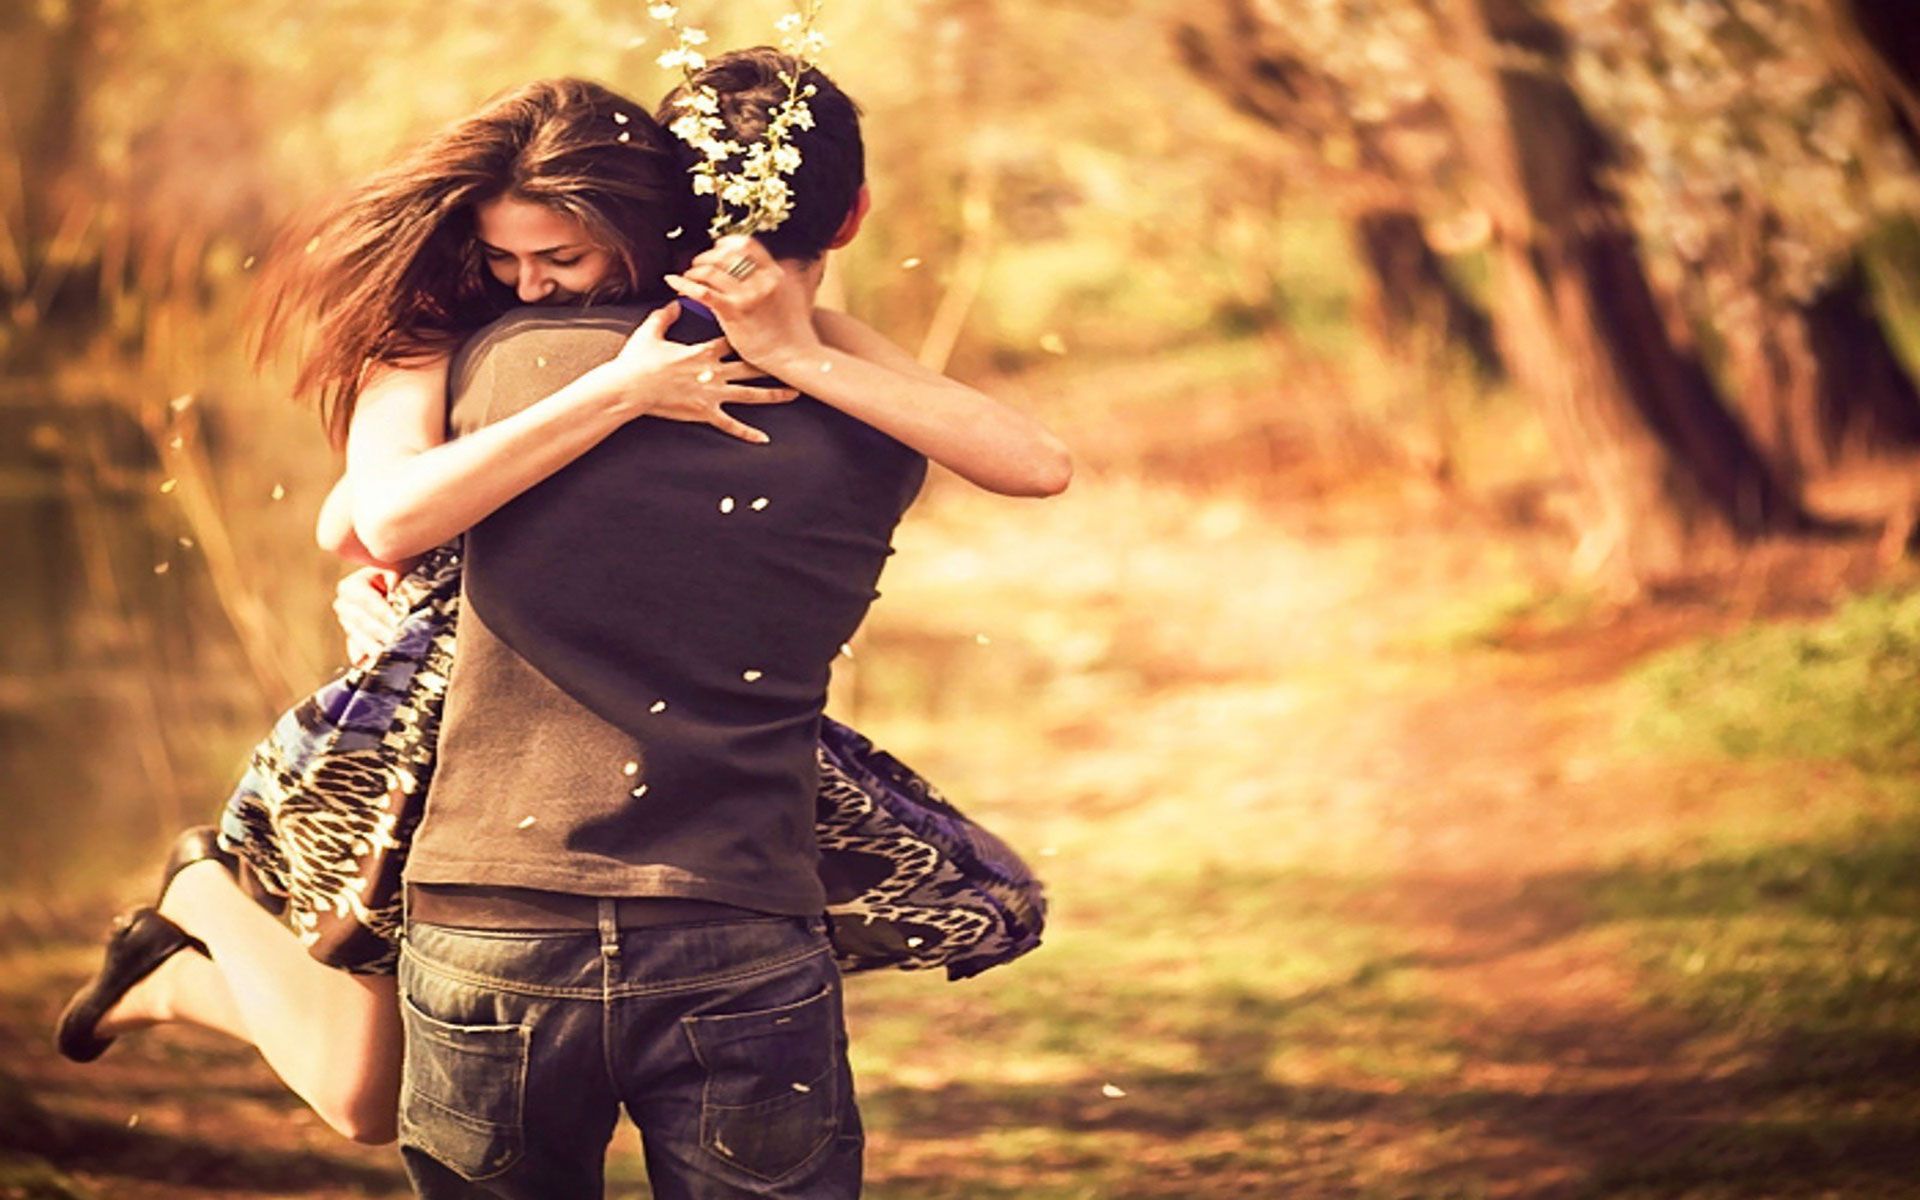 Cute Couple Hug Wallpapers Pictures of Lovers Hugging